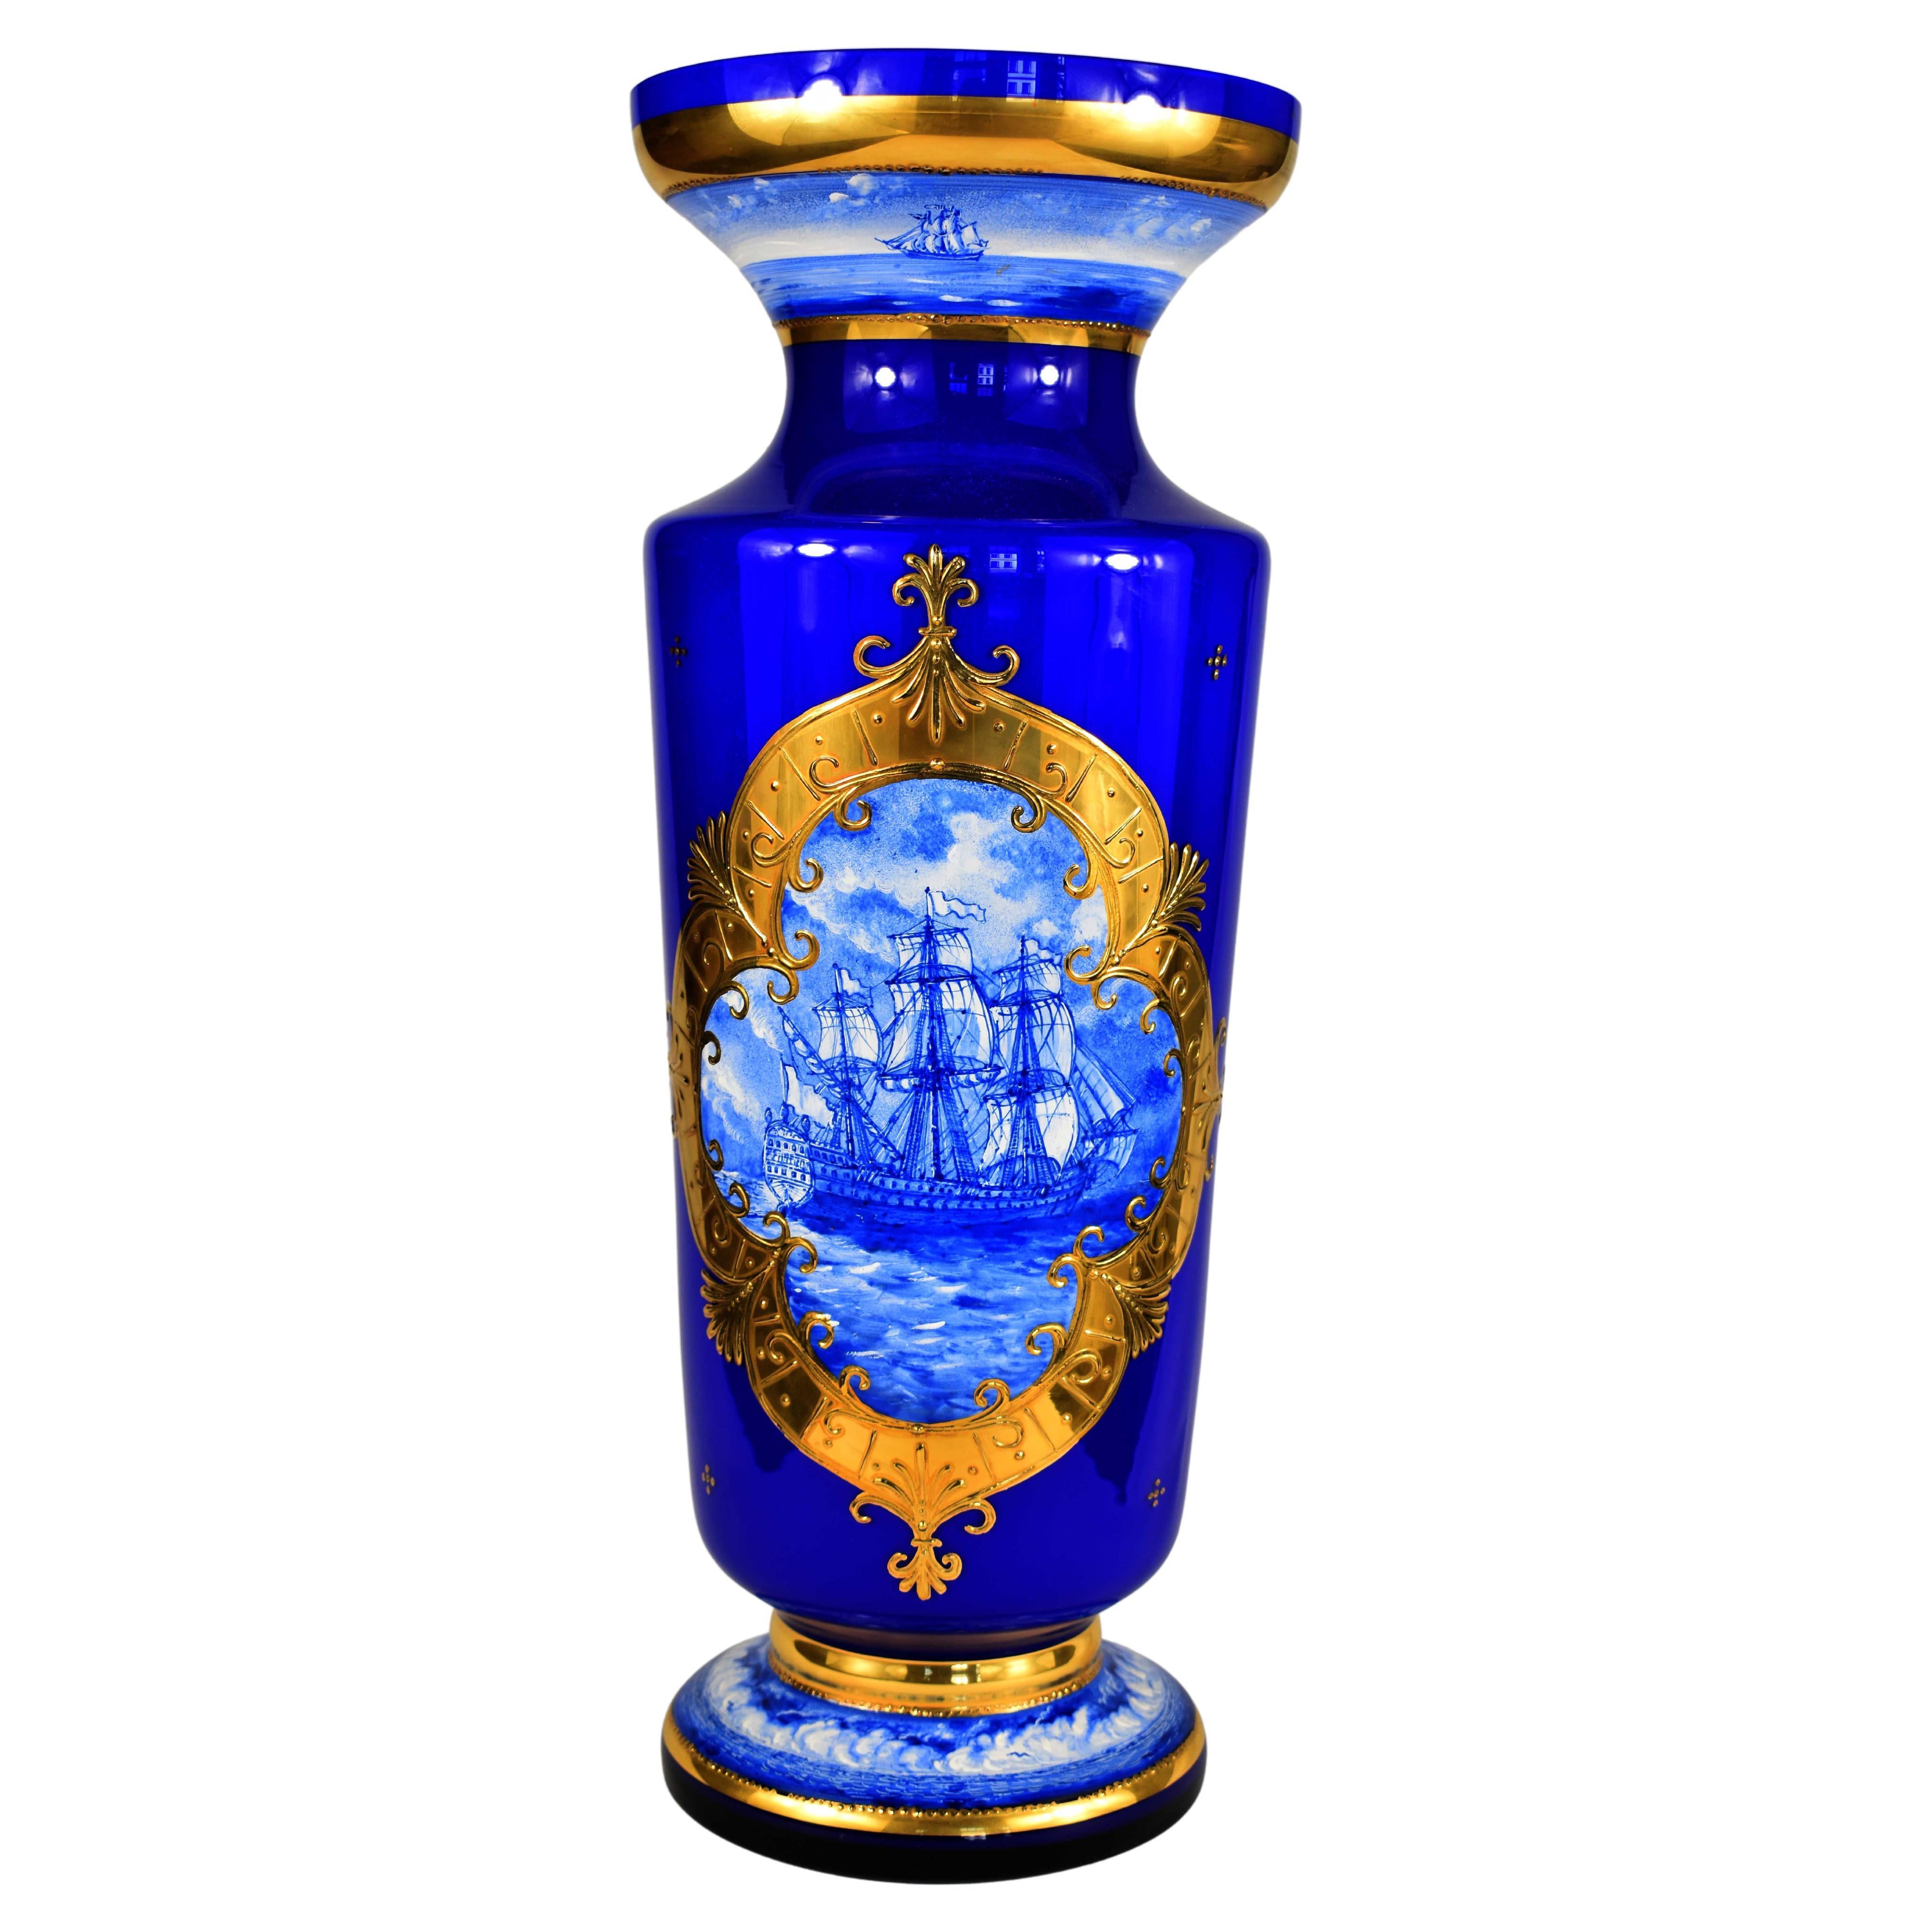 Large Opal Vase Overlay Blue Cobalt Glass, Painted Ships, Gilded, 20th Century